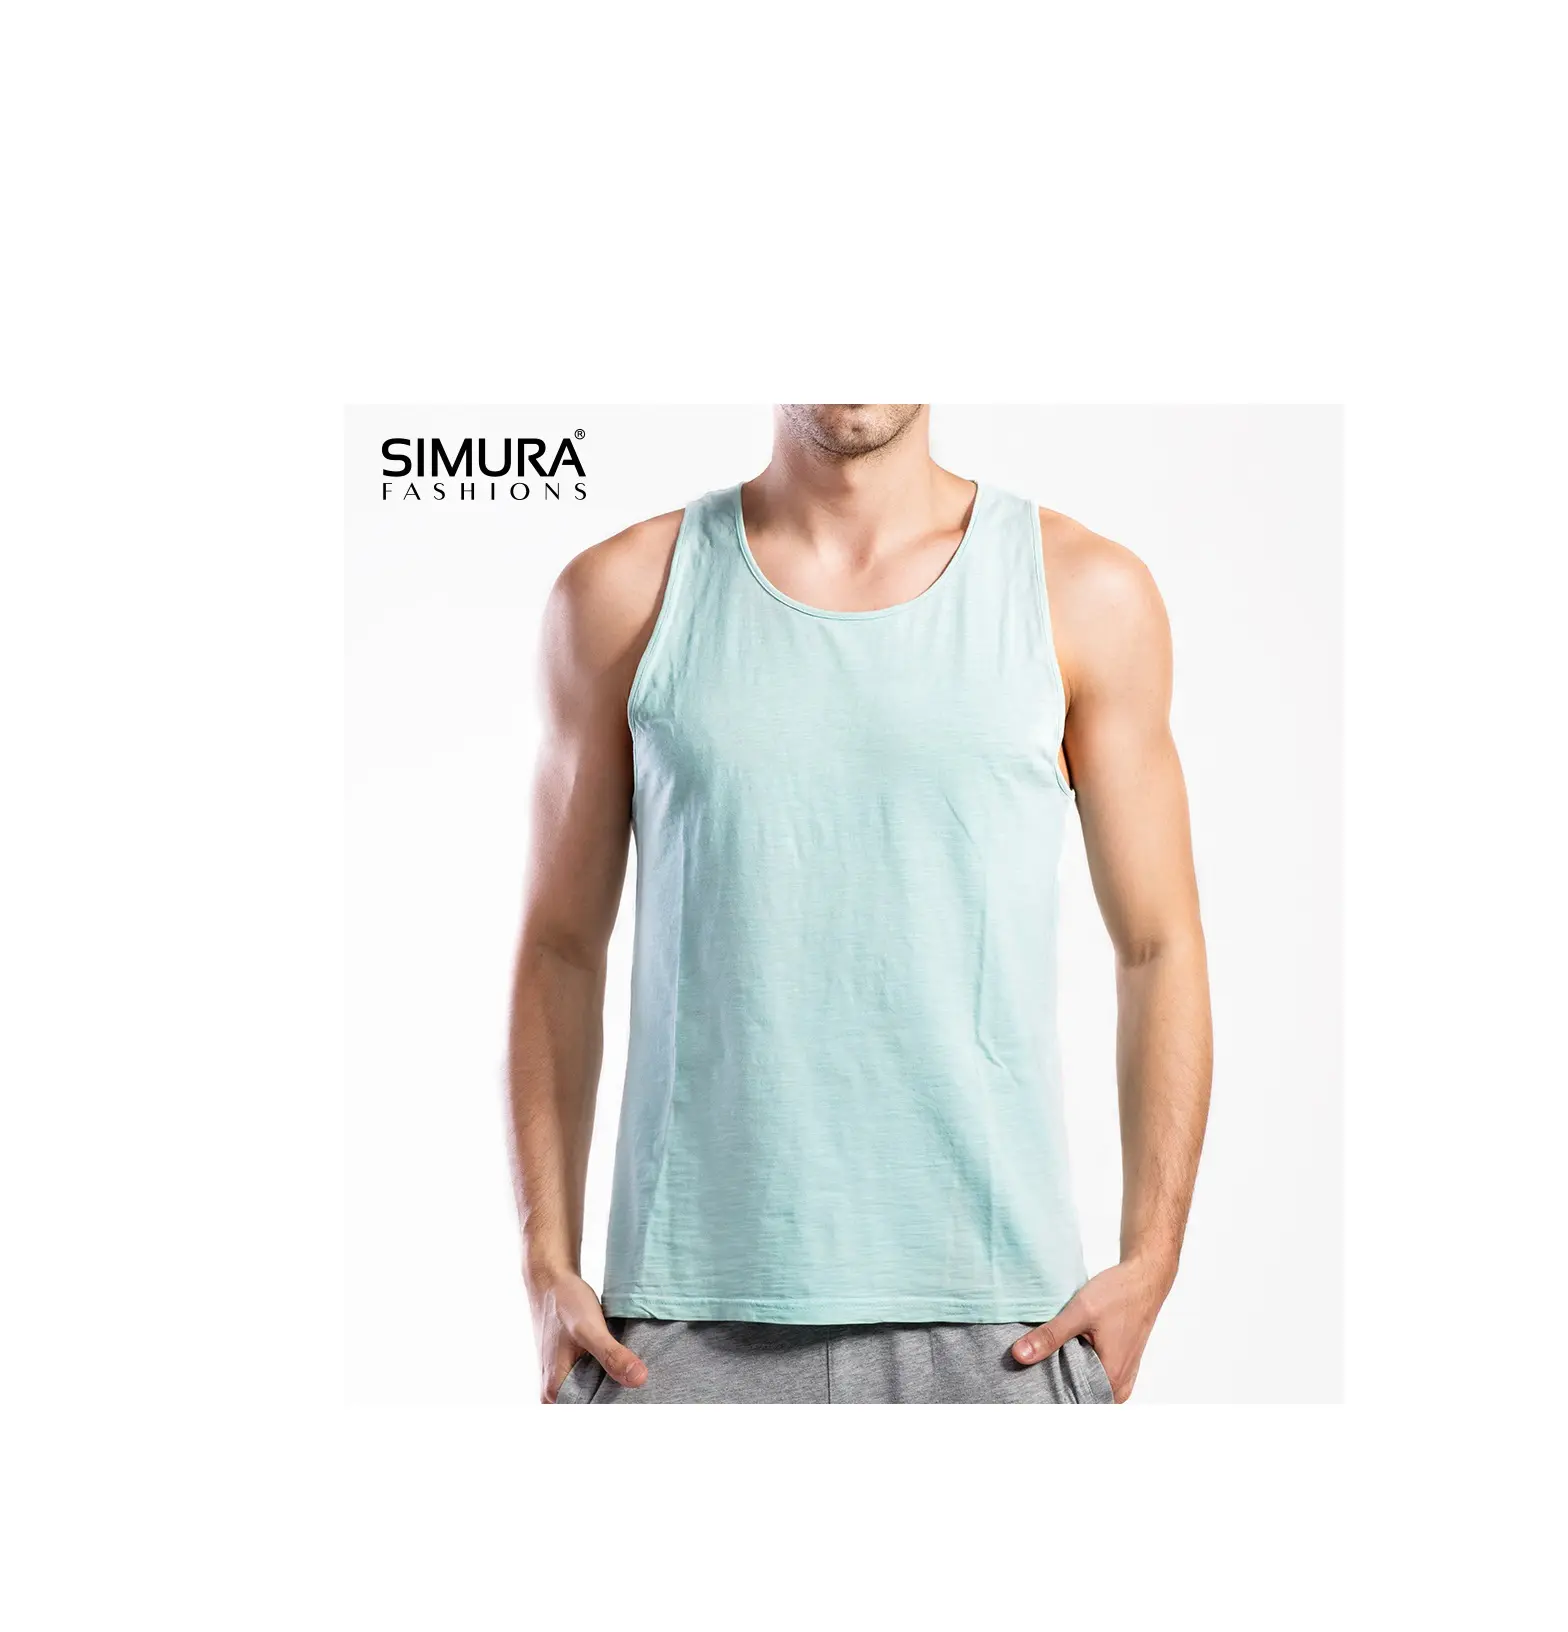 CustomFitness Sexy Mens Gym Clothes 100% Cotton Undershirt Sleeveless Fitted Men Wholesale Tank top From Bamgladesh